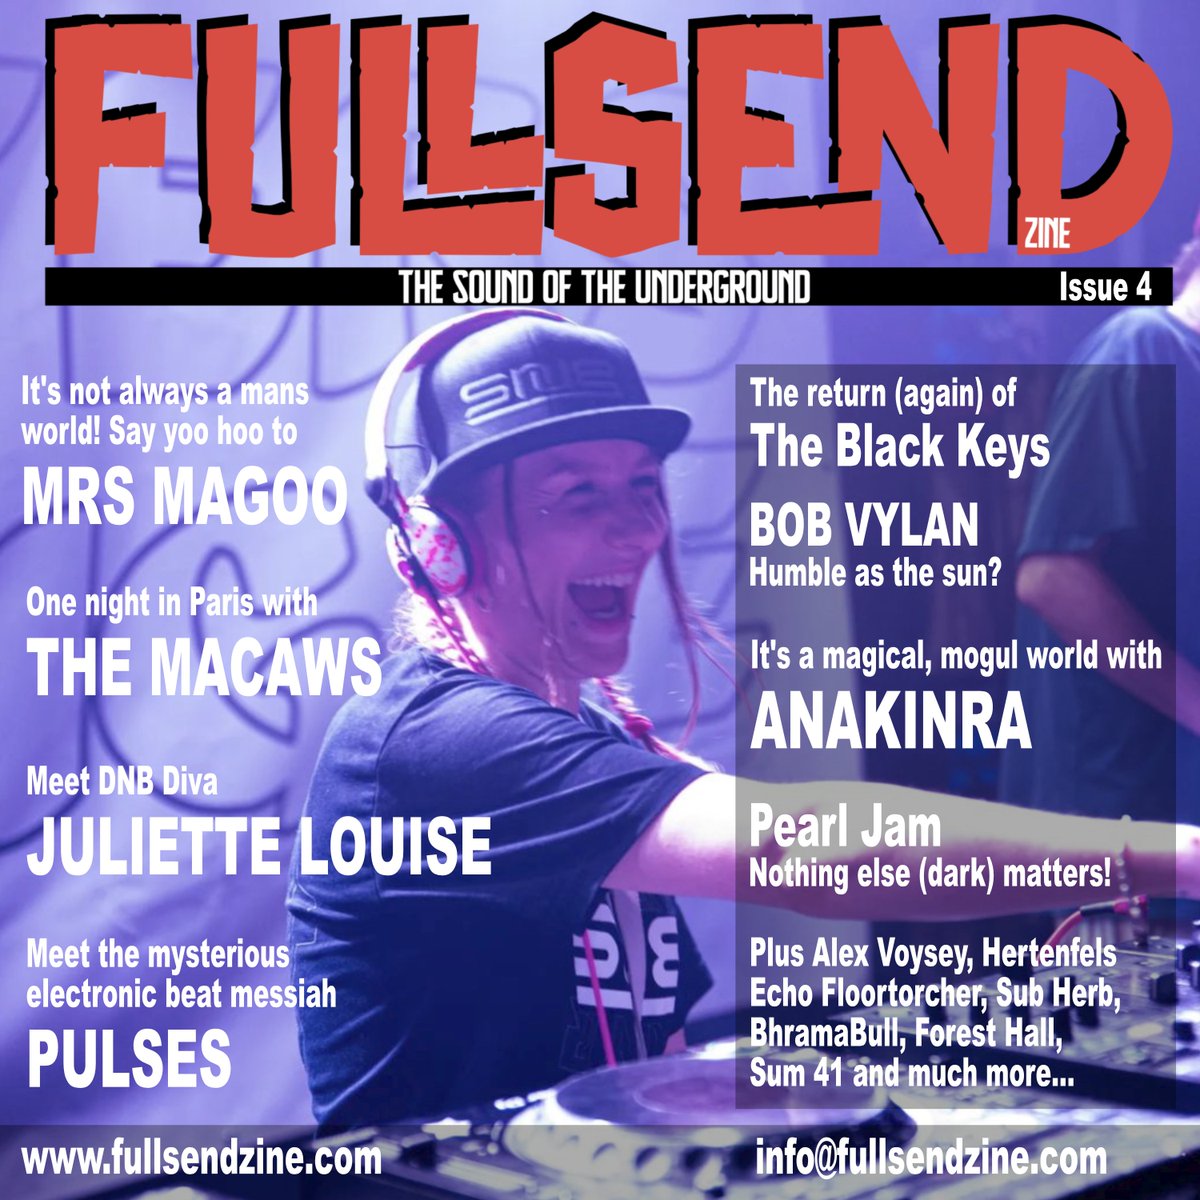 The April issue of Full Send Zine is now live and & packed with great interviews, reviews & news from the sounds of the underground including: @MrsMagoo_DnB @juliettelouise @Themacaws1 @pulsesnotts @theblackkeys @BobbyVylan @bhramabull @ForestHall19 fullsendzine.com